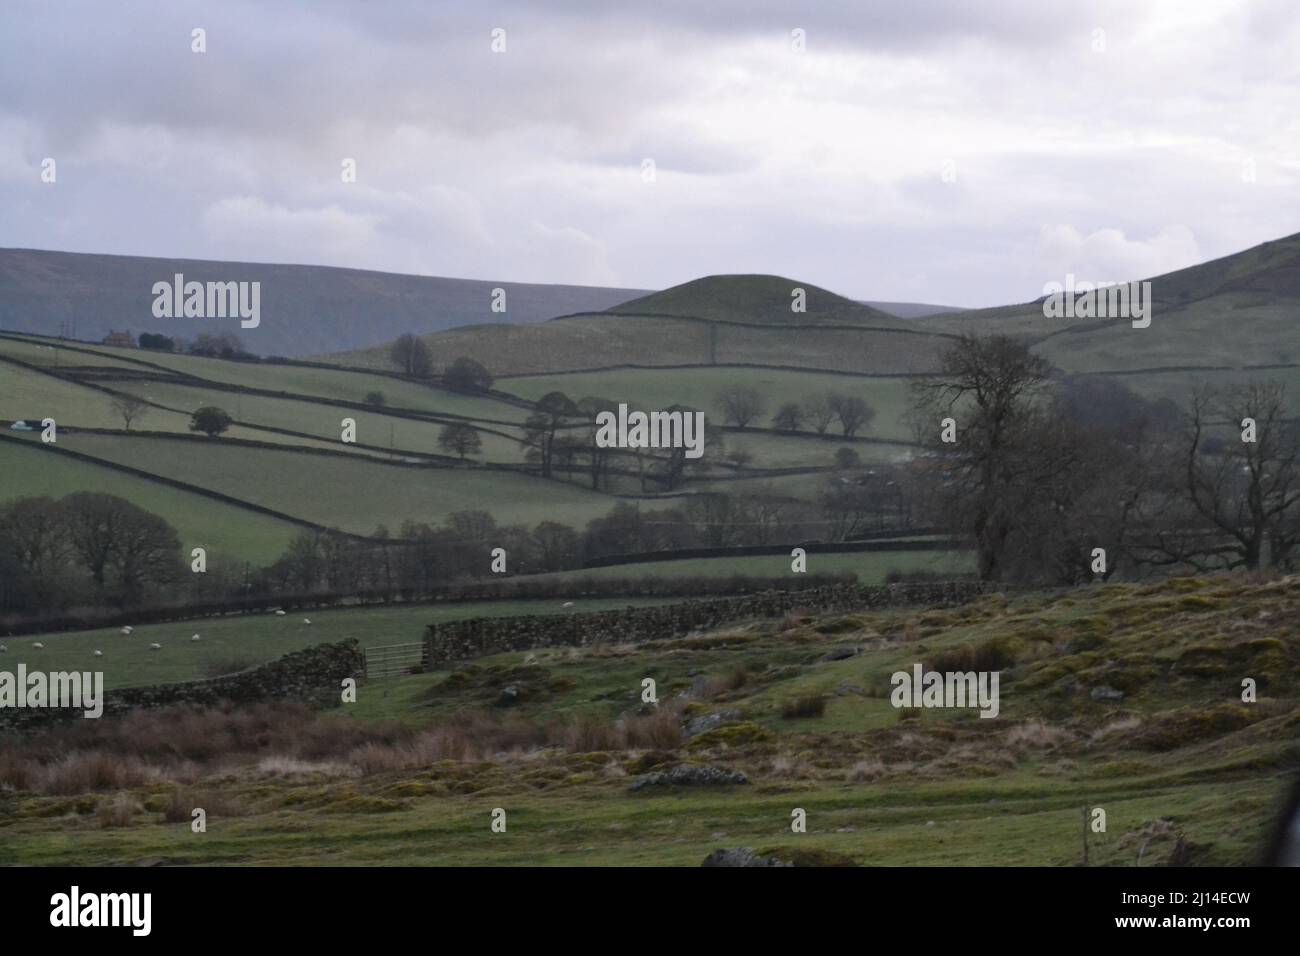 Grass Mound / Hill On The North Yorkshire Moors - Round Hill - Overcast Winters Day - Yorkshire Moors - UK Stock Photo